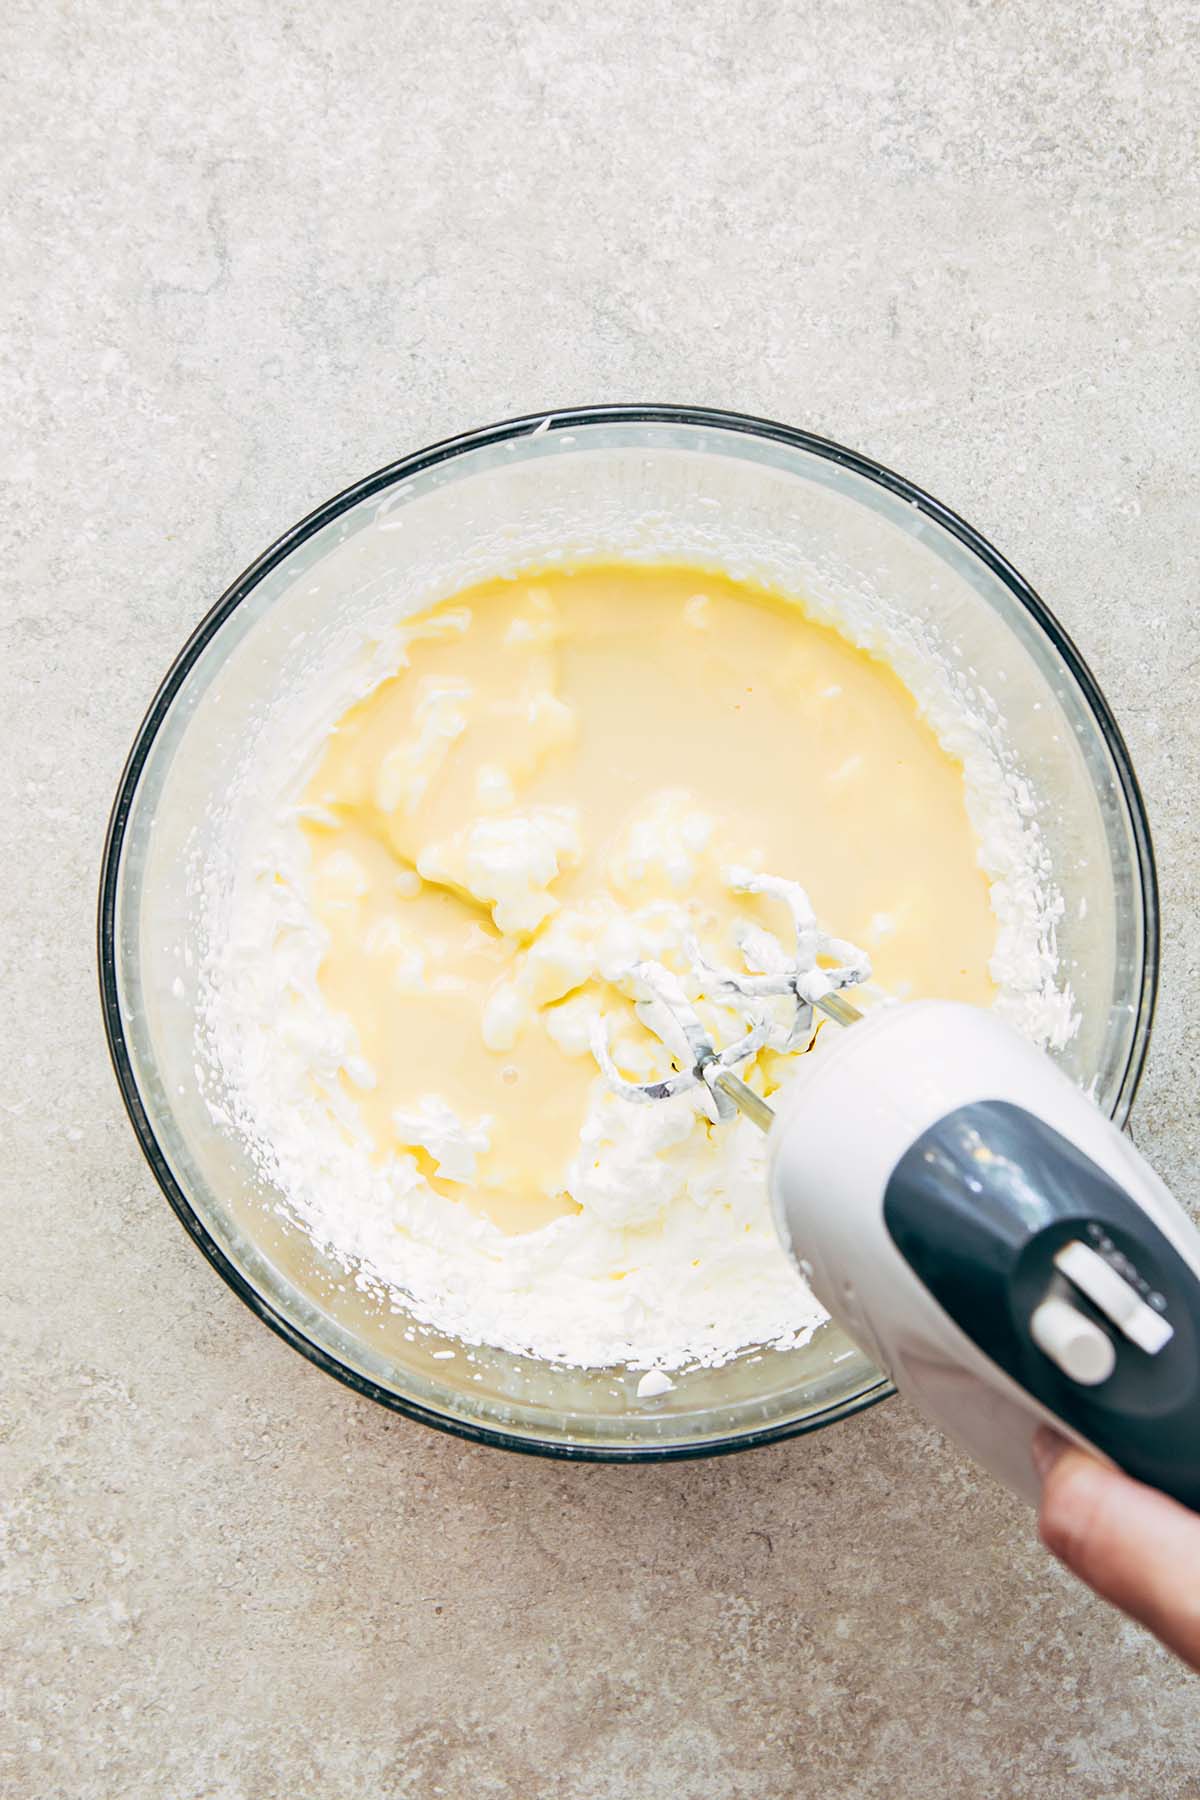 A hand mixer mixing cream and condensed milk together in a large glass bowl.